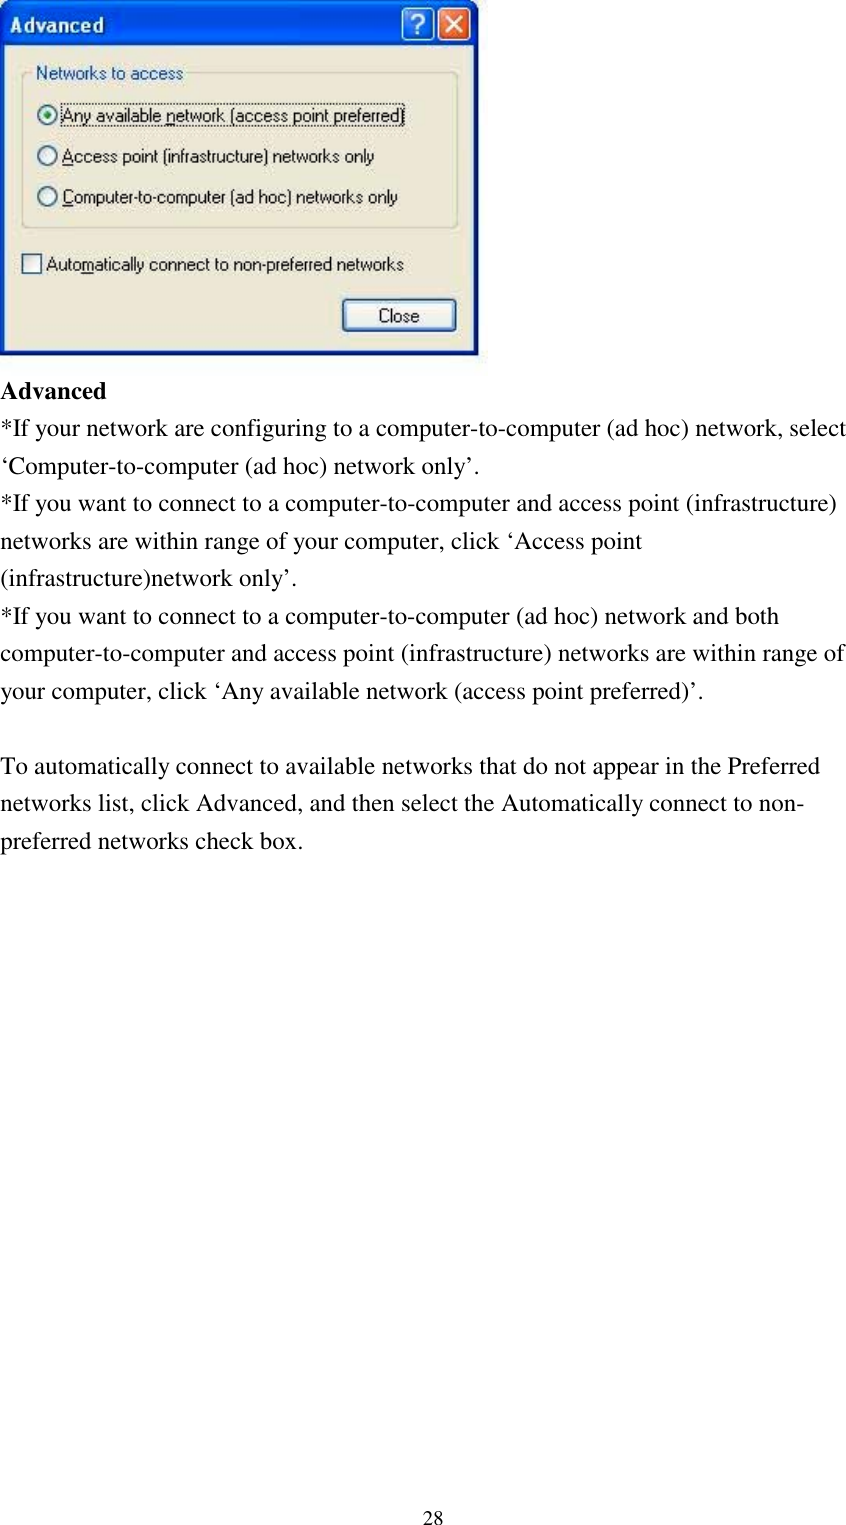 28Advanced*If your network are configuring to a computer-to-computer (ad hoc) network, select‘Computer-to-computer (ad hoc) network only’.*If you want to connect to a computer-to-computer and access point (infrastructure)networks are within range of your computer, click ‘Access point(infrastructure)network only’.*If you want to connect to a computer-to-computer (ad hoc) network and bothcomputer-to-computer and access point (infrastructure) networks are within range ofyour computer, click ‘Any available network (access point preferred)’.To automatically connect to available networks that do not appear in the Preferrednetworks list, click Advanced, and then select the Automatically connect to non-preferred networks check box.